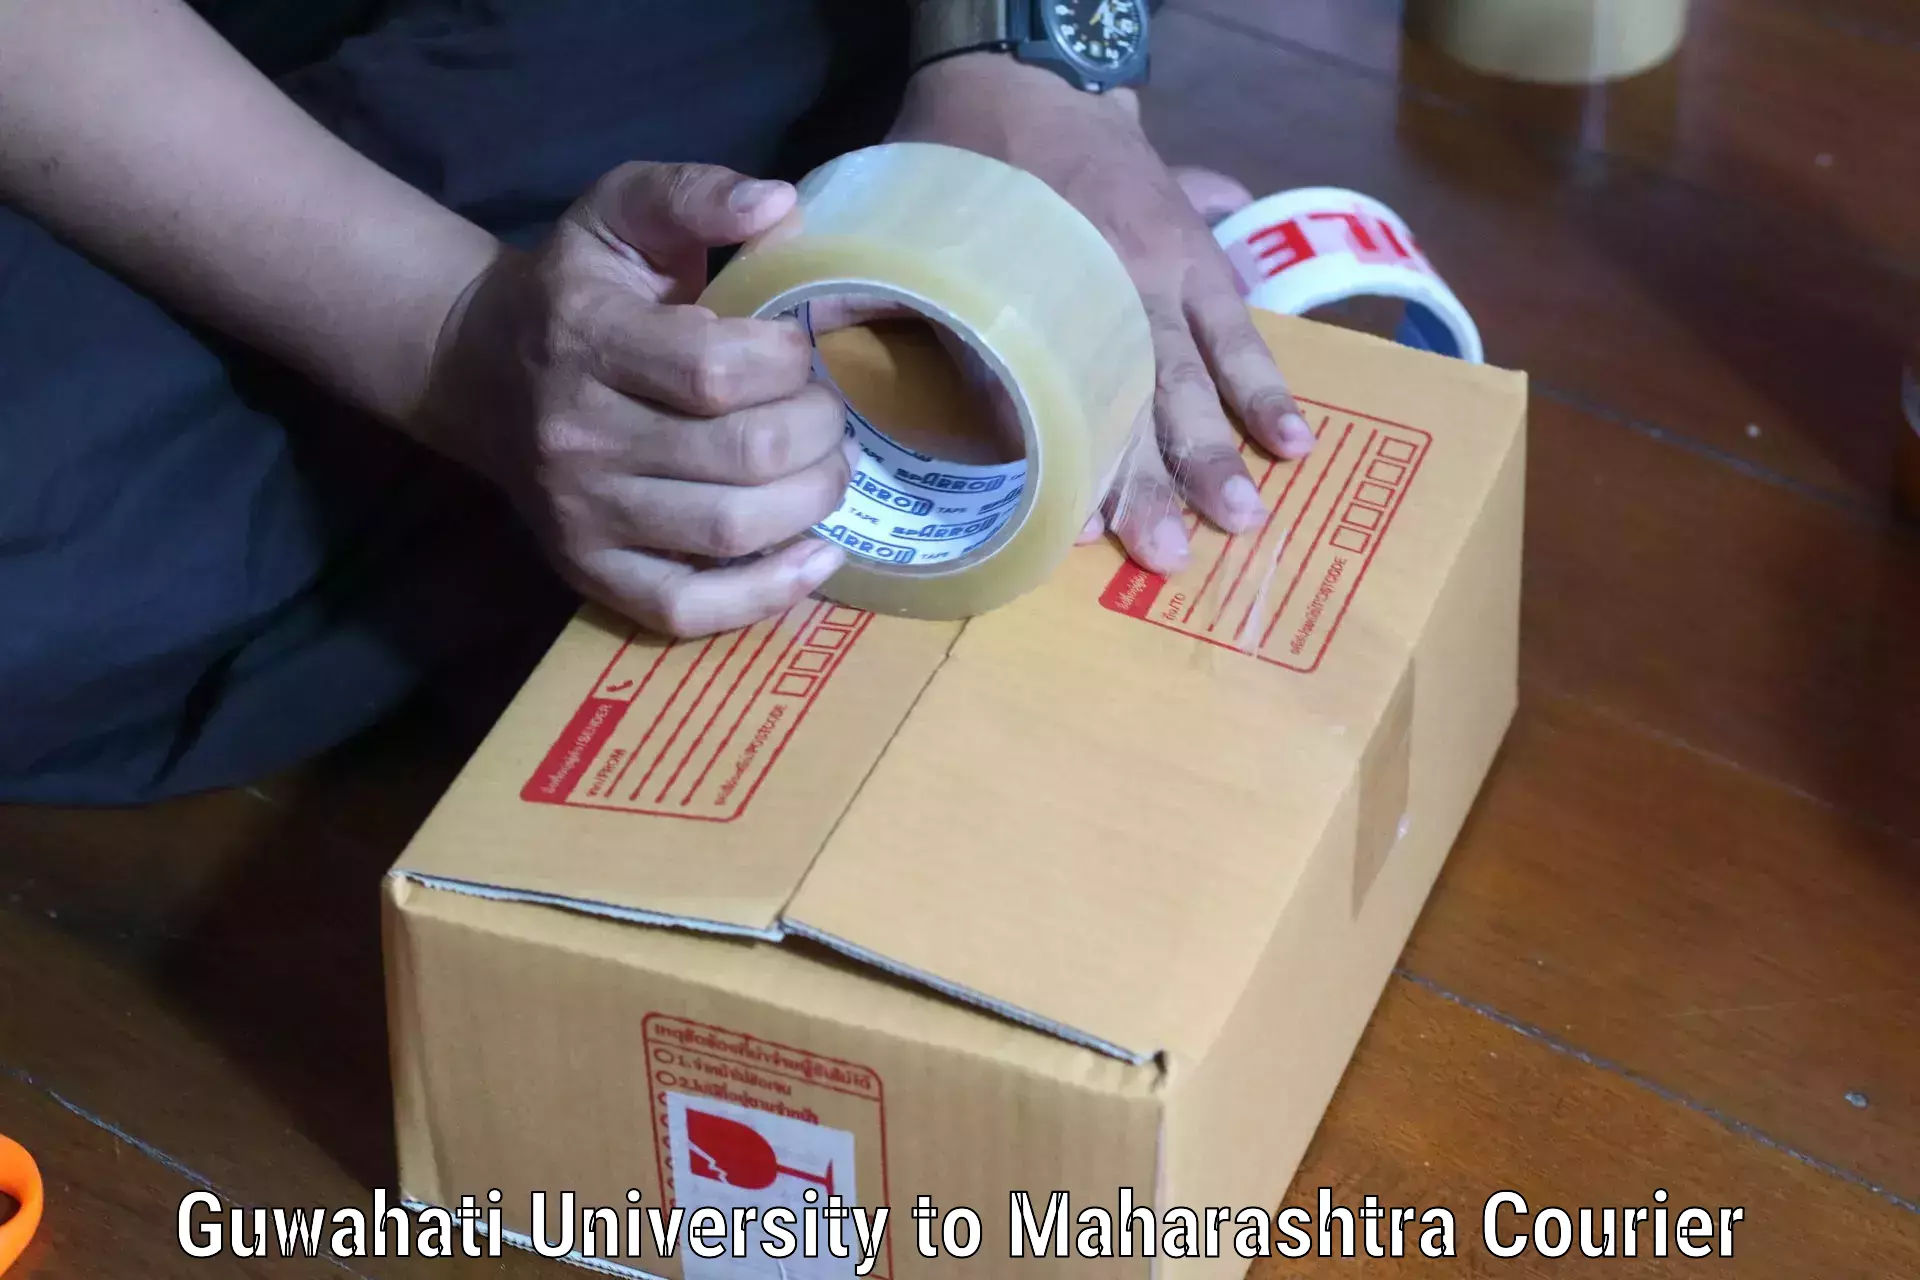 Tailored delivery services Guwahati University to Mumbai Port